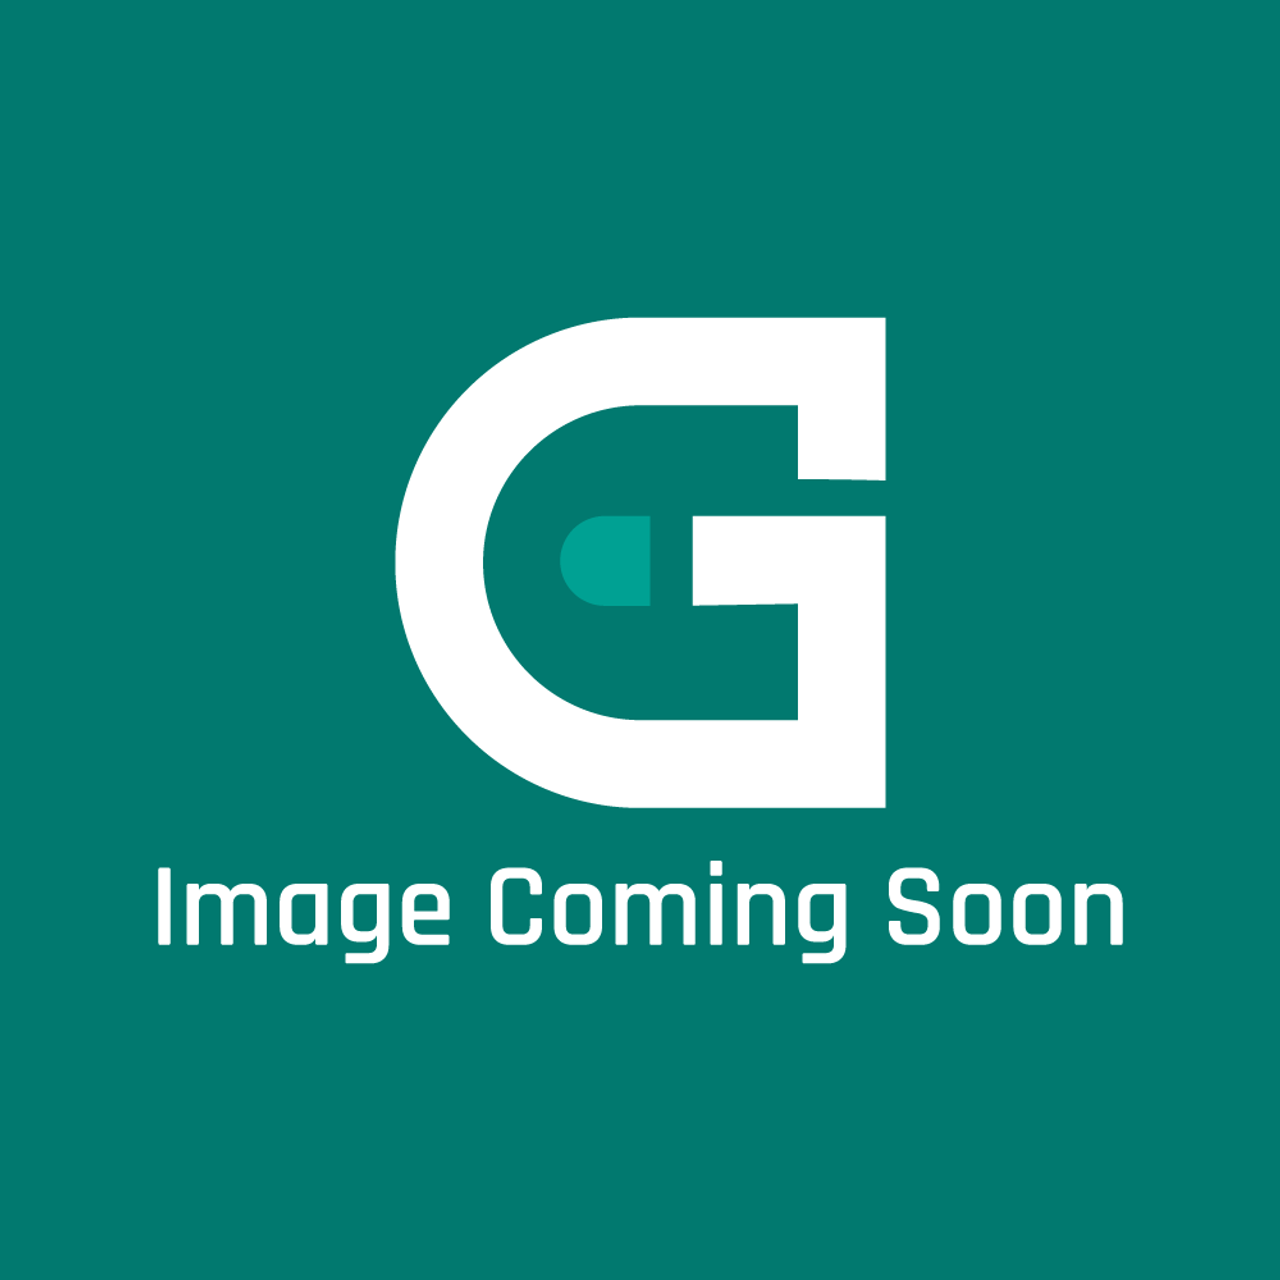 AGA Marvel AG4M251648 - Plug In Micropoint Socket Bes 6058 60/24 - Image Coming Soon!